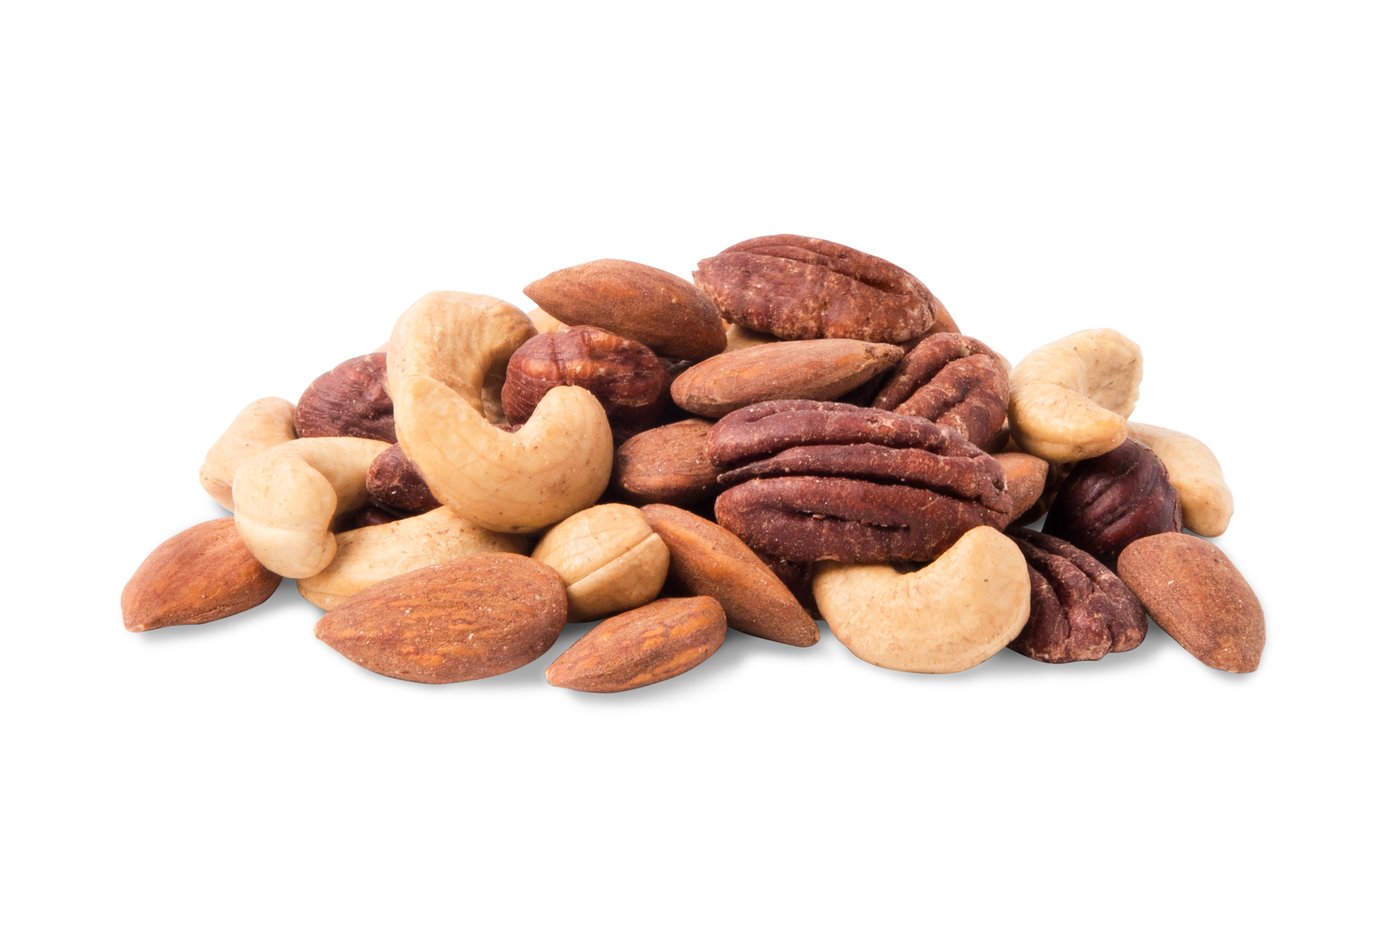 Organic Roasted Mixed Nuts (Unsalted) image zoom